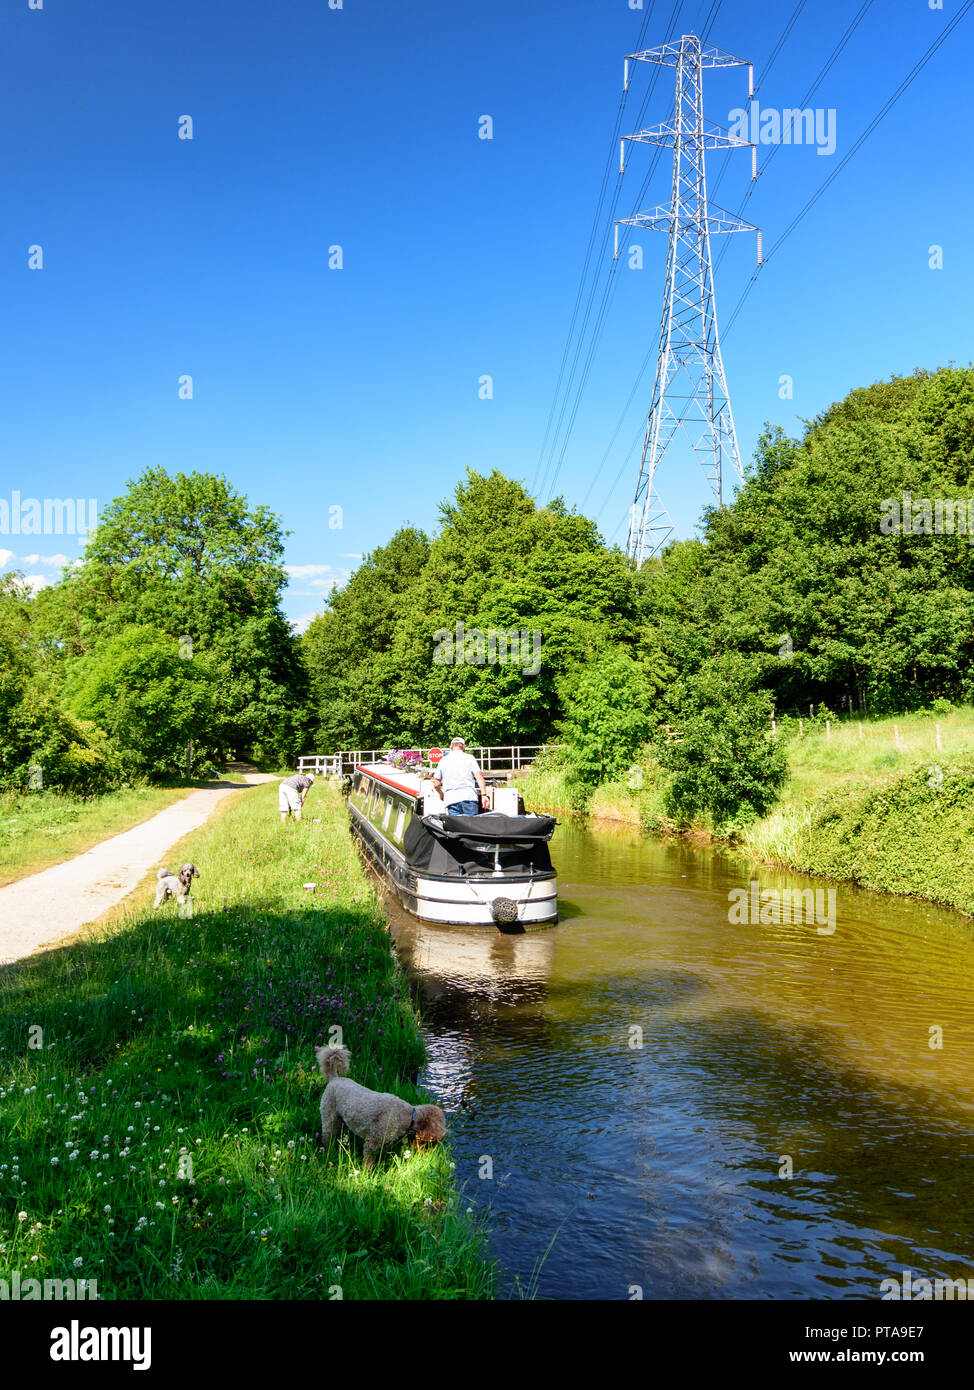 Shipley, England - June 30, 2015: A traditional narrowboat travels along the Leeds and Liverpool Canal on a sunny summer day, while wakers and dogs pa Stock Photo